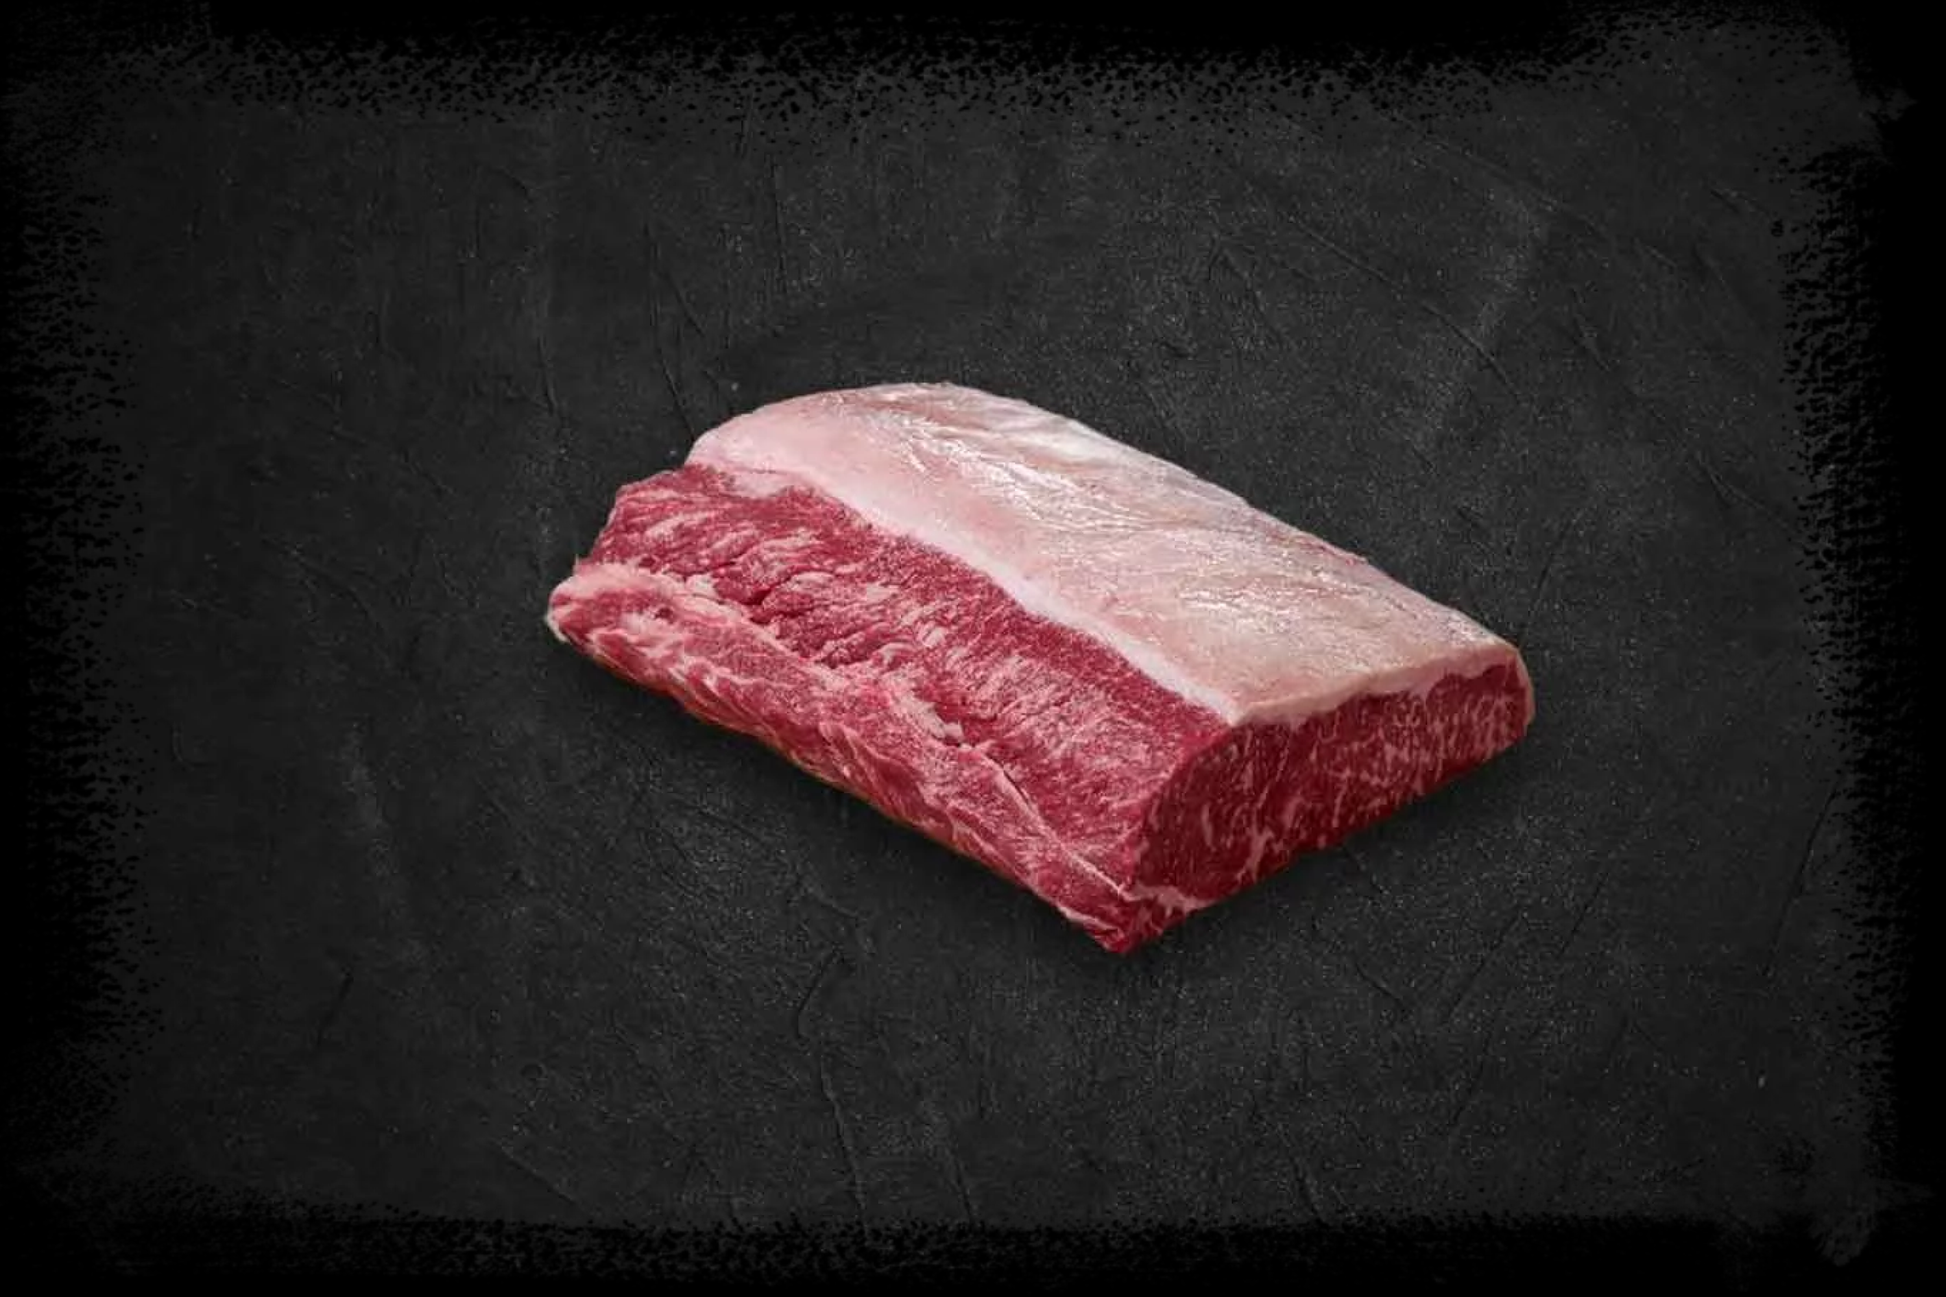 Grass-Fed Beef Striploin, Australia (Dhs 56.87/kg) - Chilled